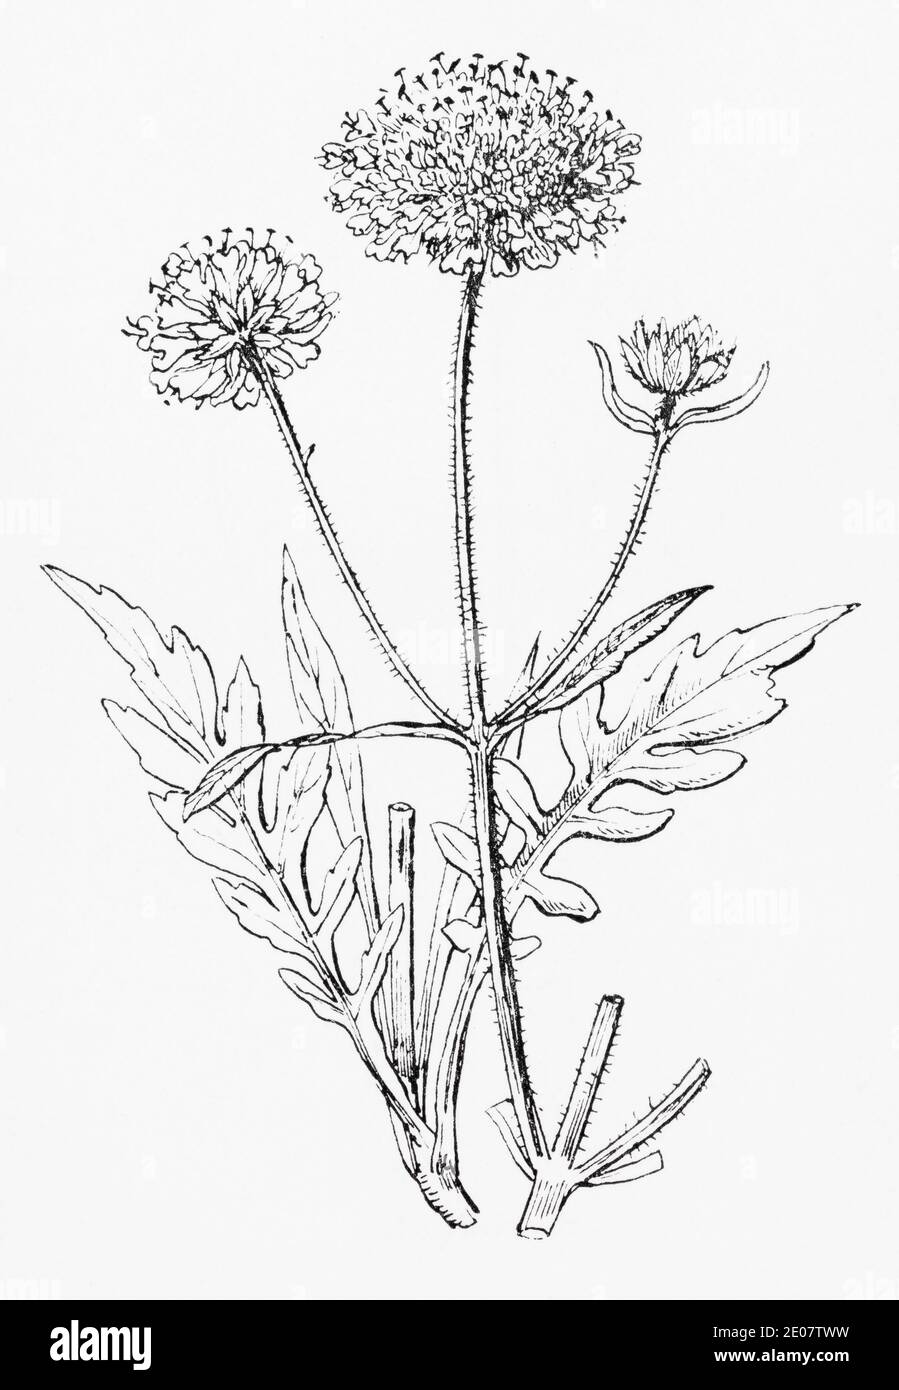 Old botanical illustration engraving of Field Scabious / Knautia arvensis, Scabiosa arvensis. Traditional medicinal herbal plant. See Notes Stock Photo